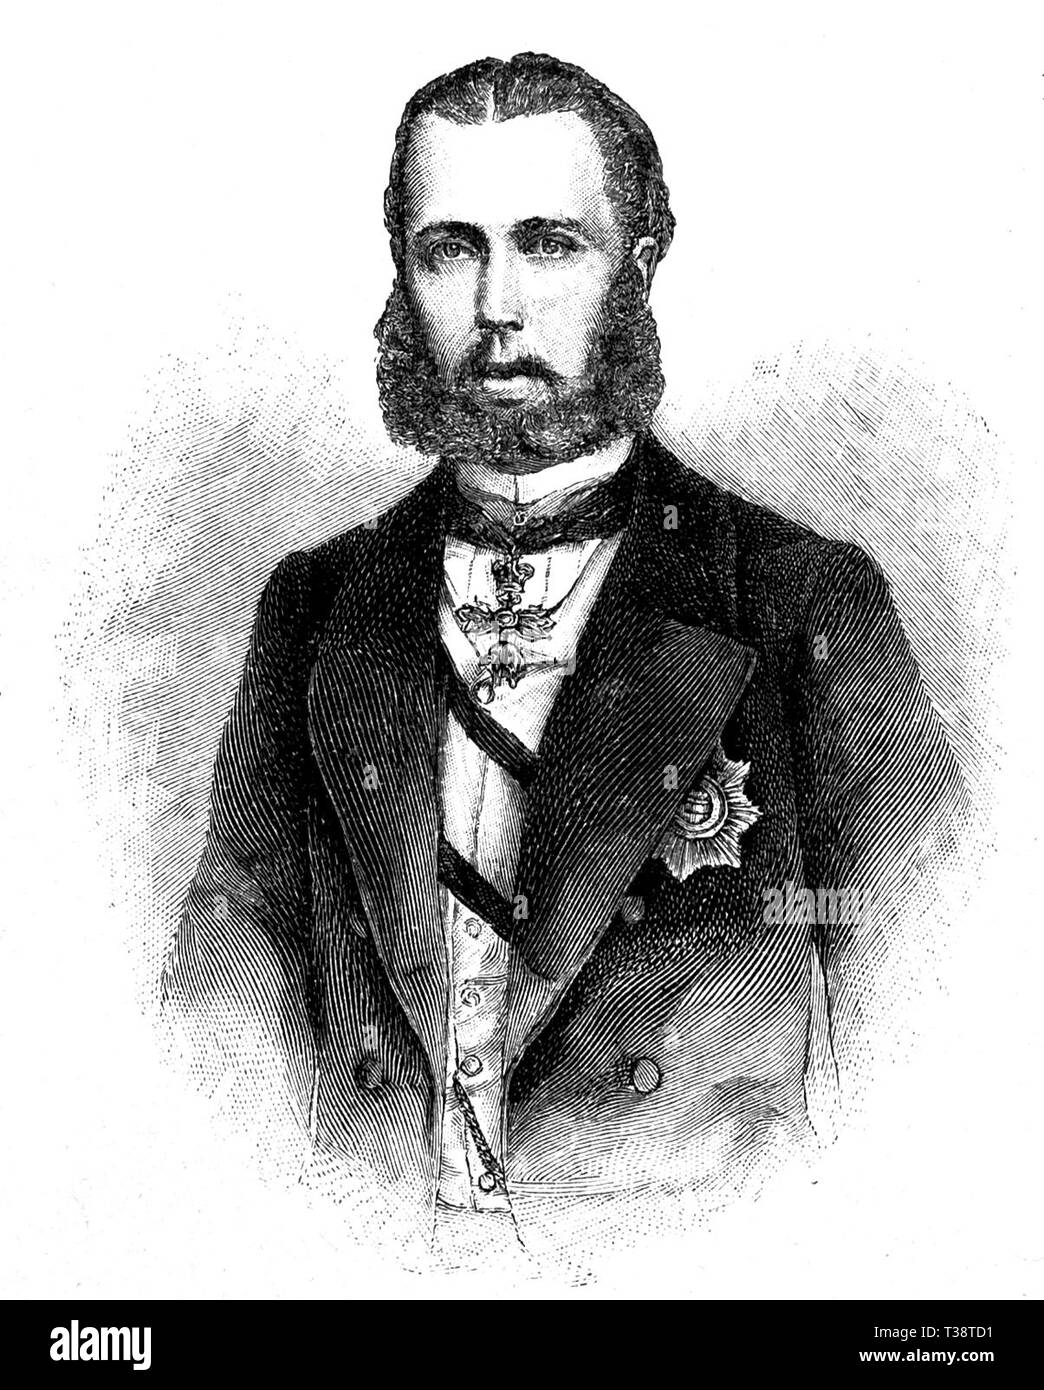 Maximilian I, Emperor of Mexico. Digital improved reproduction from Illustrated overview of the life of mankind in the 19th century, 1901 edition, Marx publishing house, St. Petersburg. Stock Photo